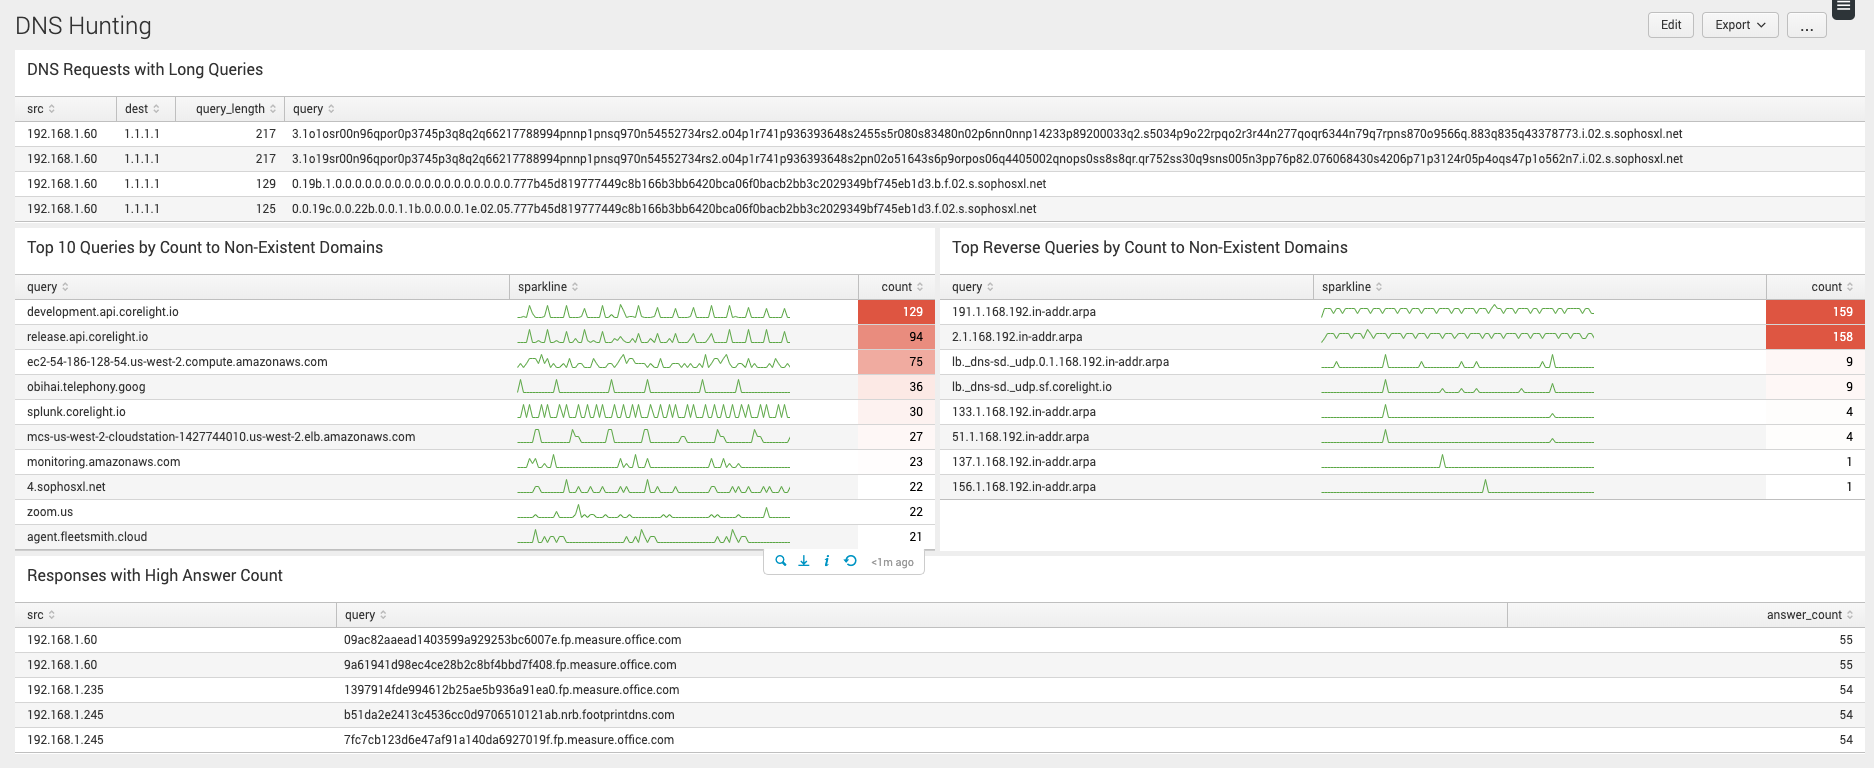 Corelight dashboard in Splunk showing executables hiding in benign file extensions.